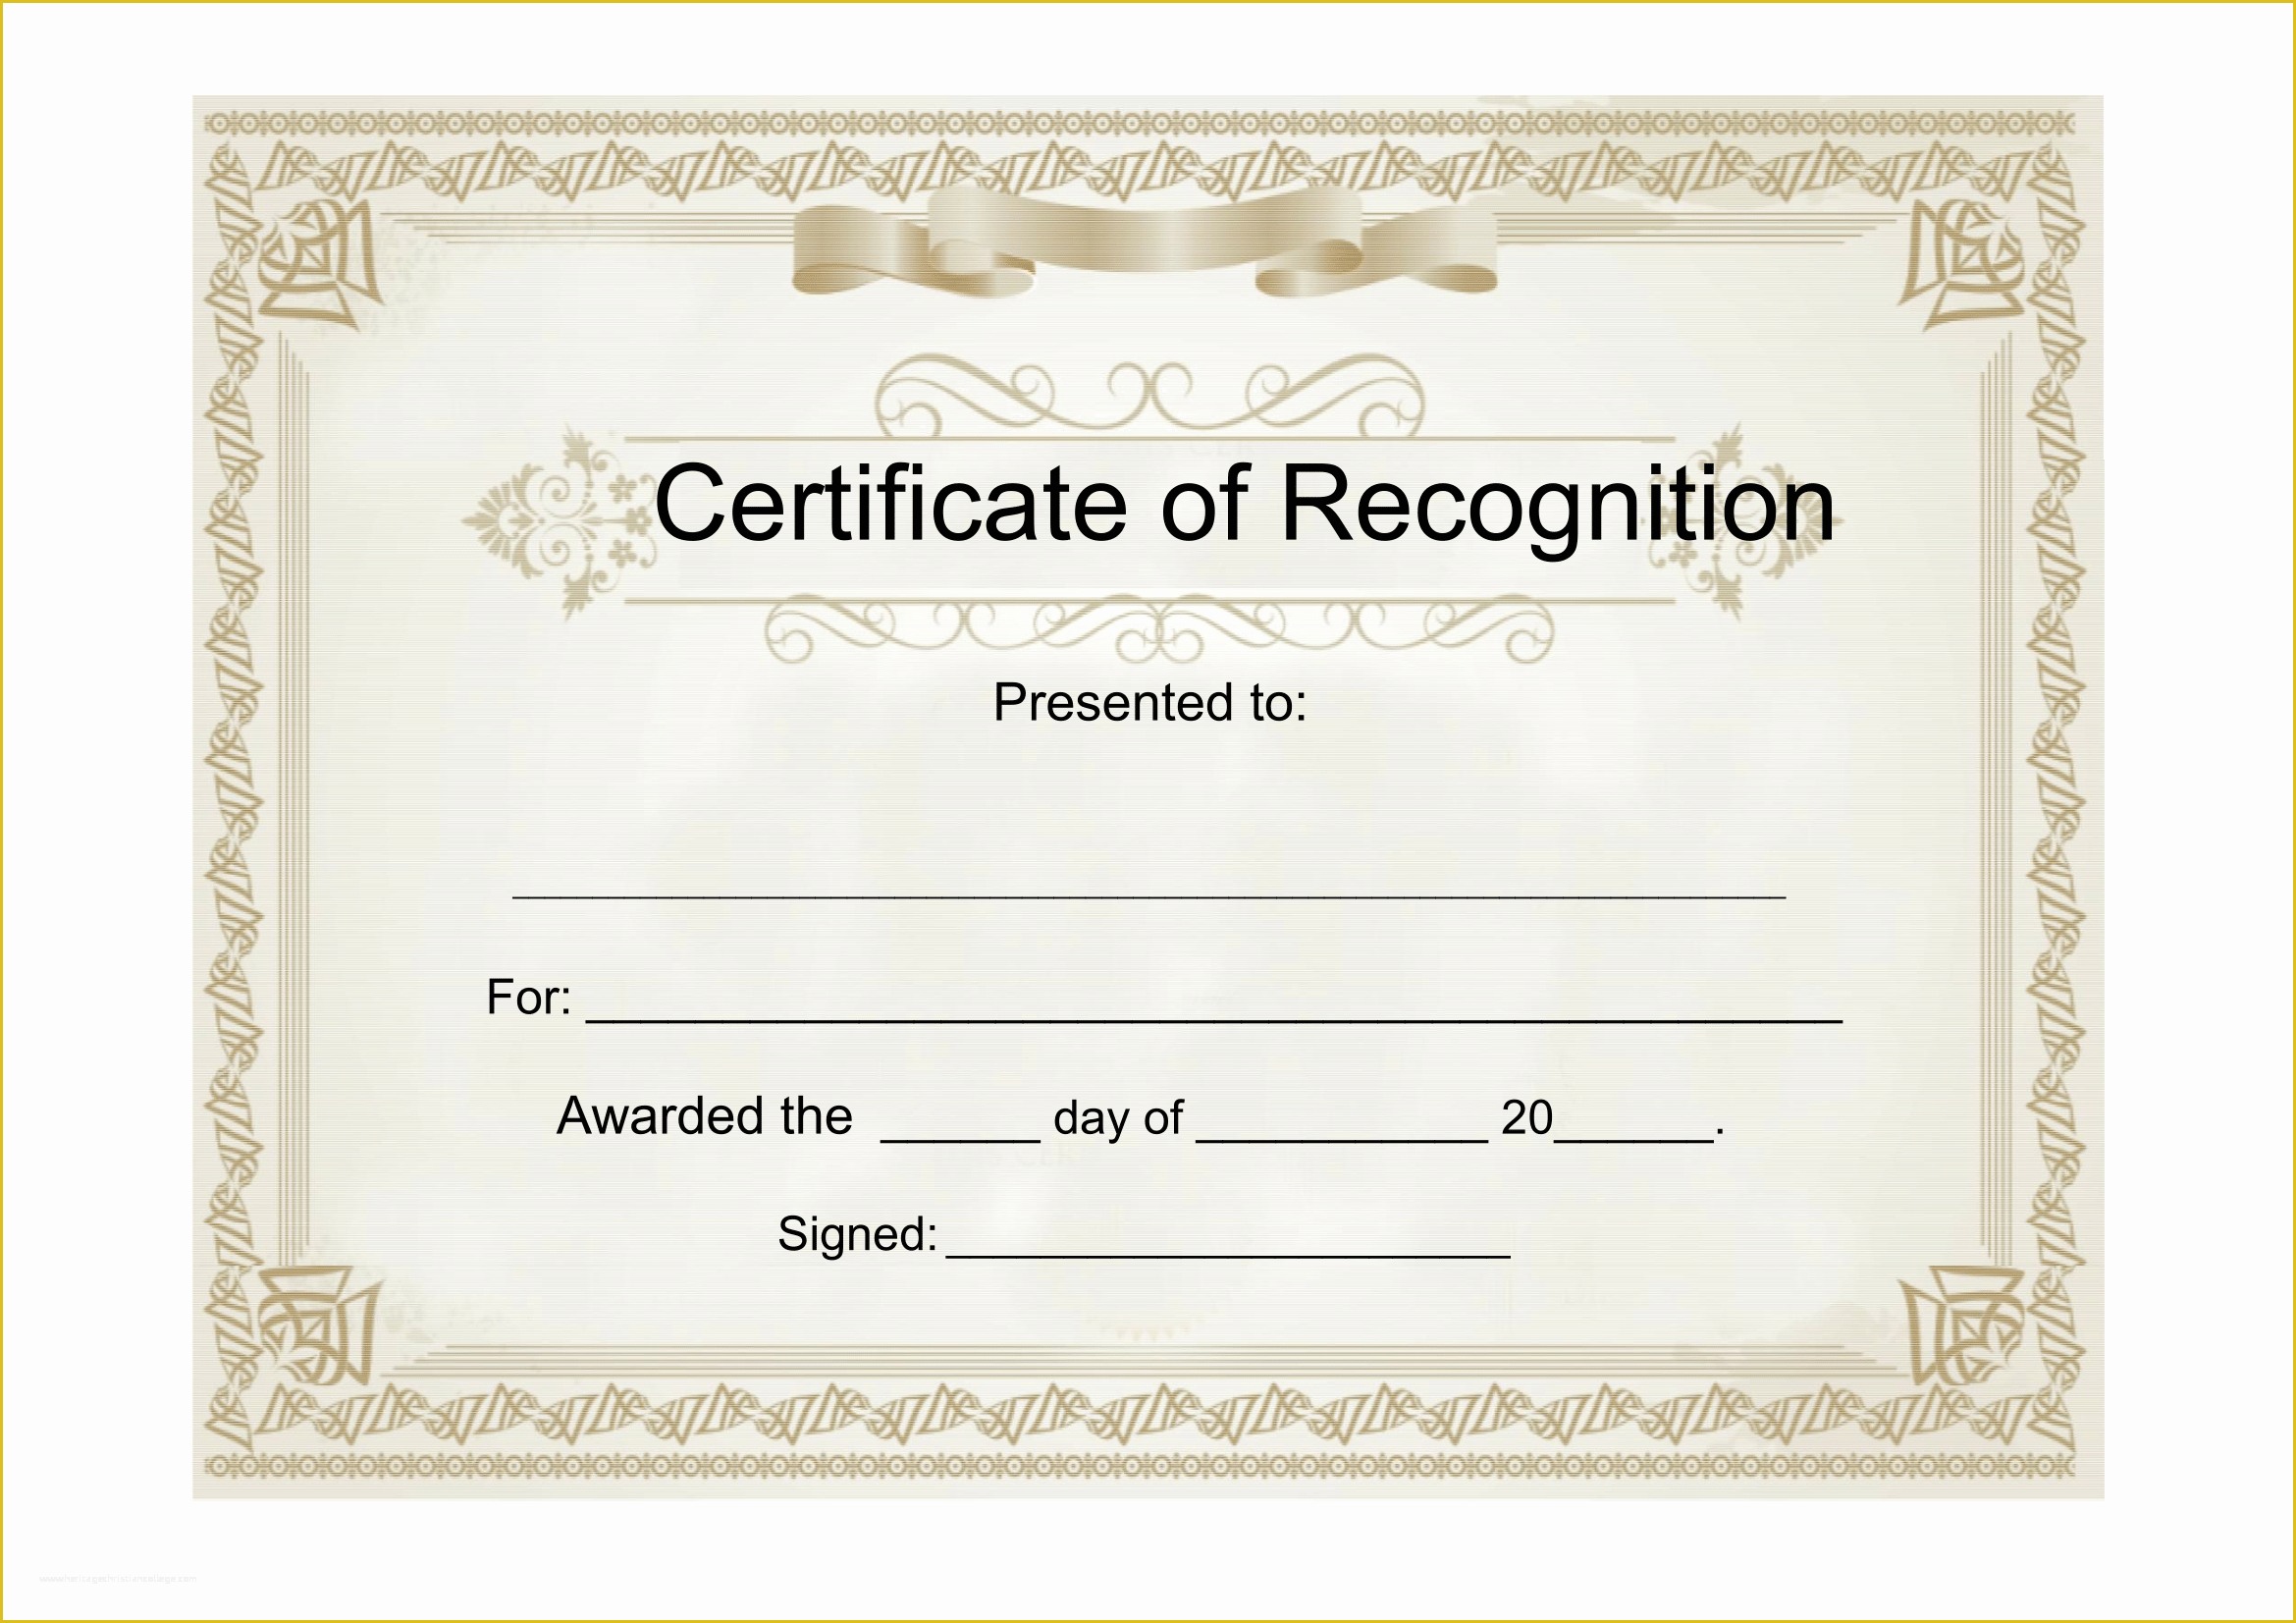 Certificate Of Recognition Template Free Of Sample Certificate Of Recognition Free Download Template